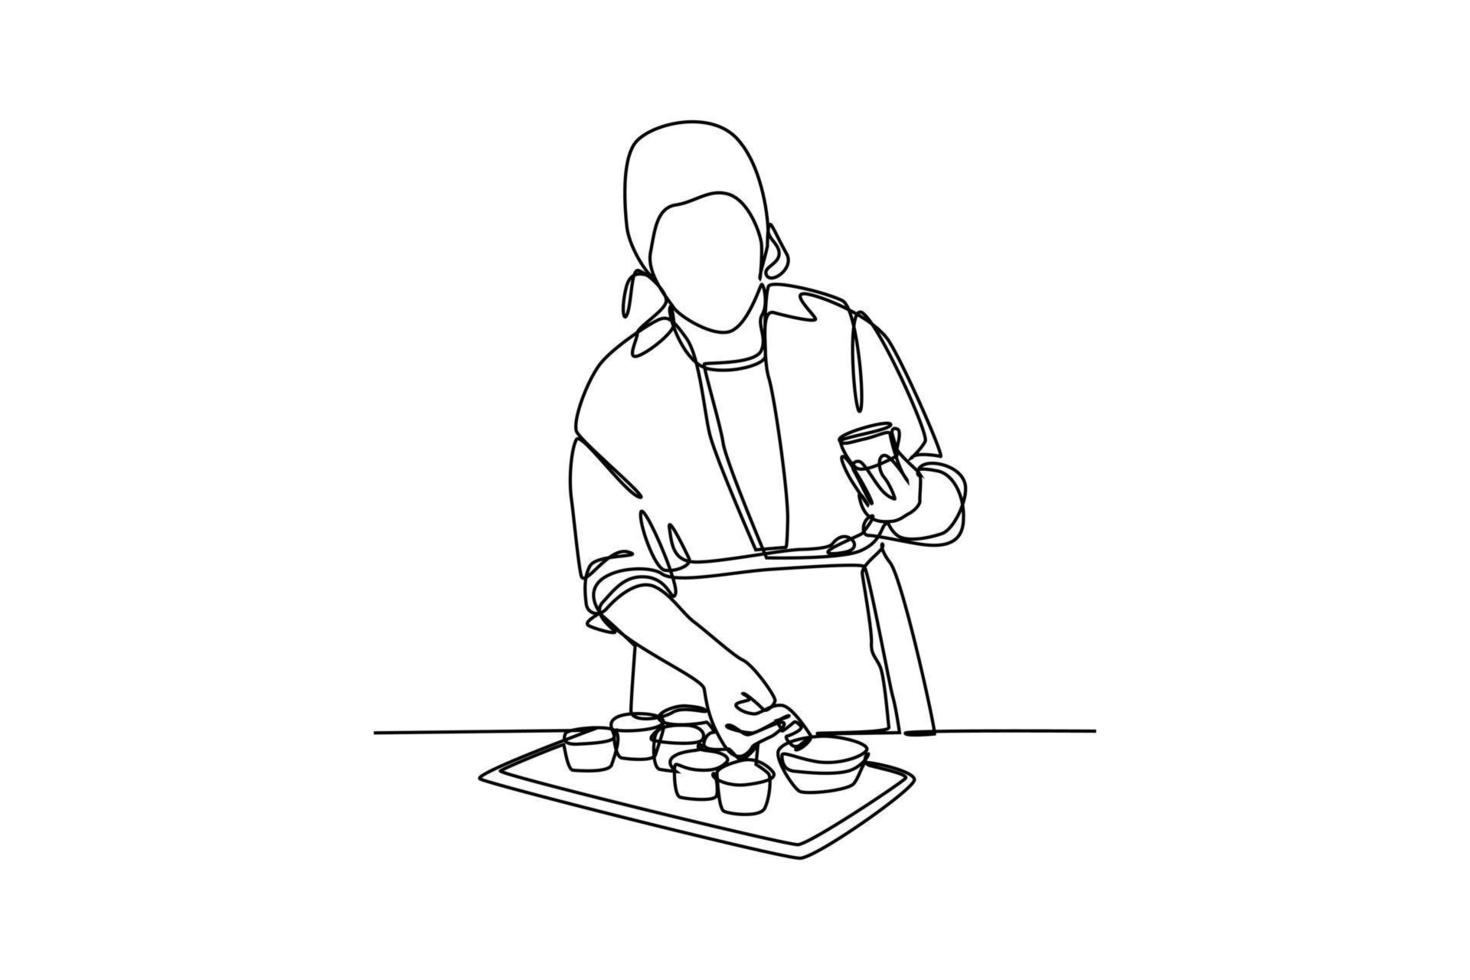 Continuous one-line drawing a chef decorating cupcakes. Kitchen activity concept. Single line drawing design graphic vector illustration